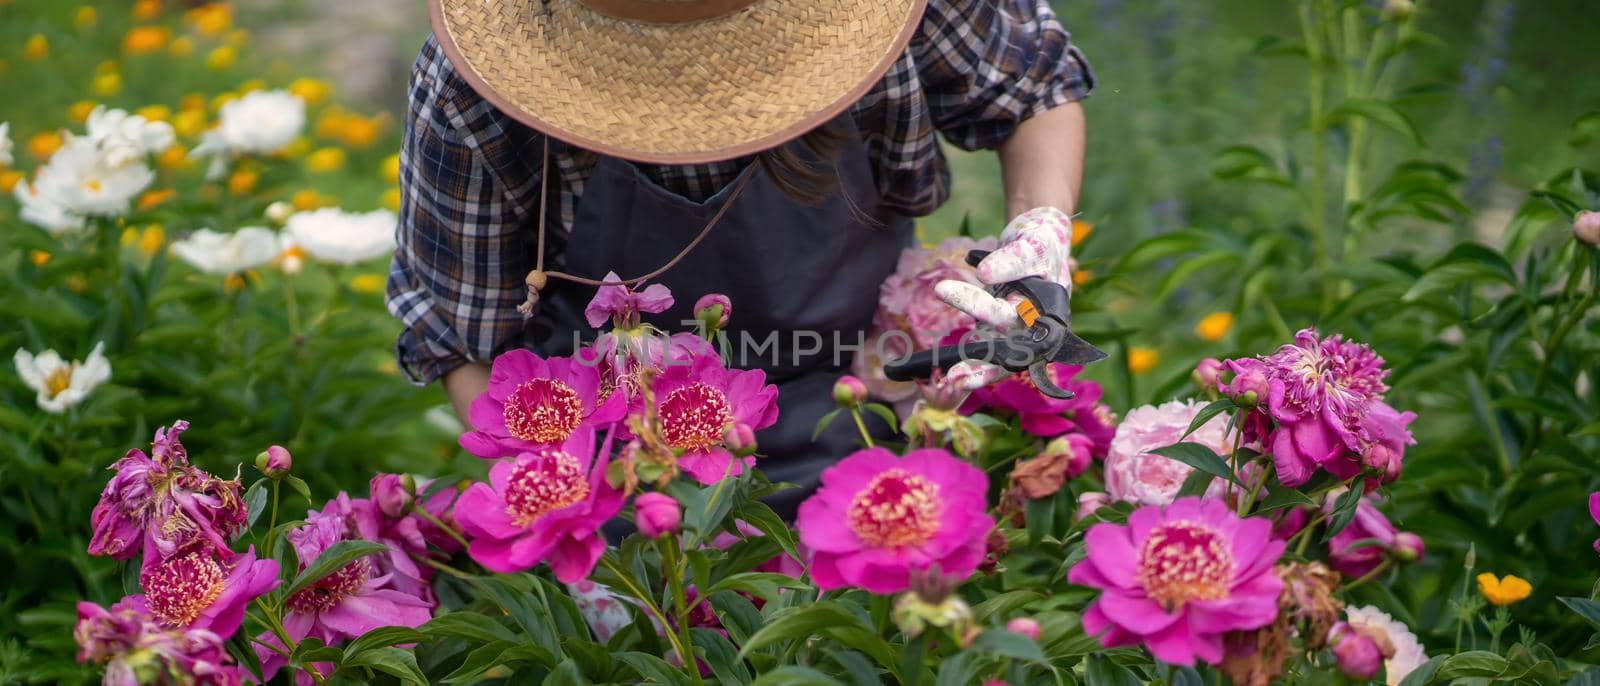 A gardener girl in a straw hat and gloves looks after bushes of lush pink peonies, a woman is engaged in gardening and plant cultivation.